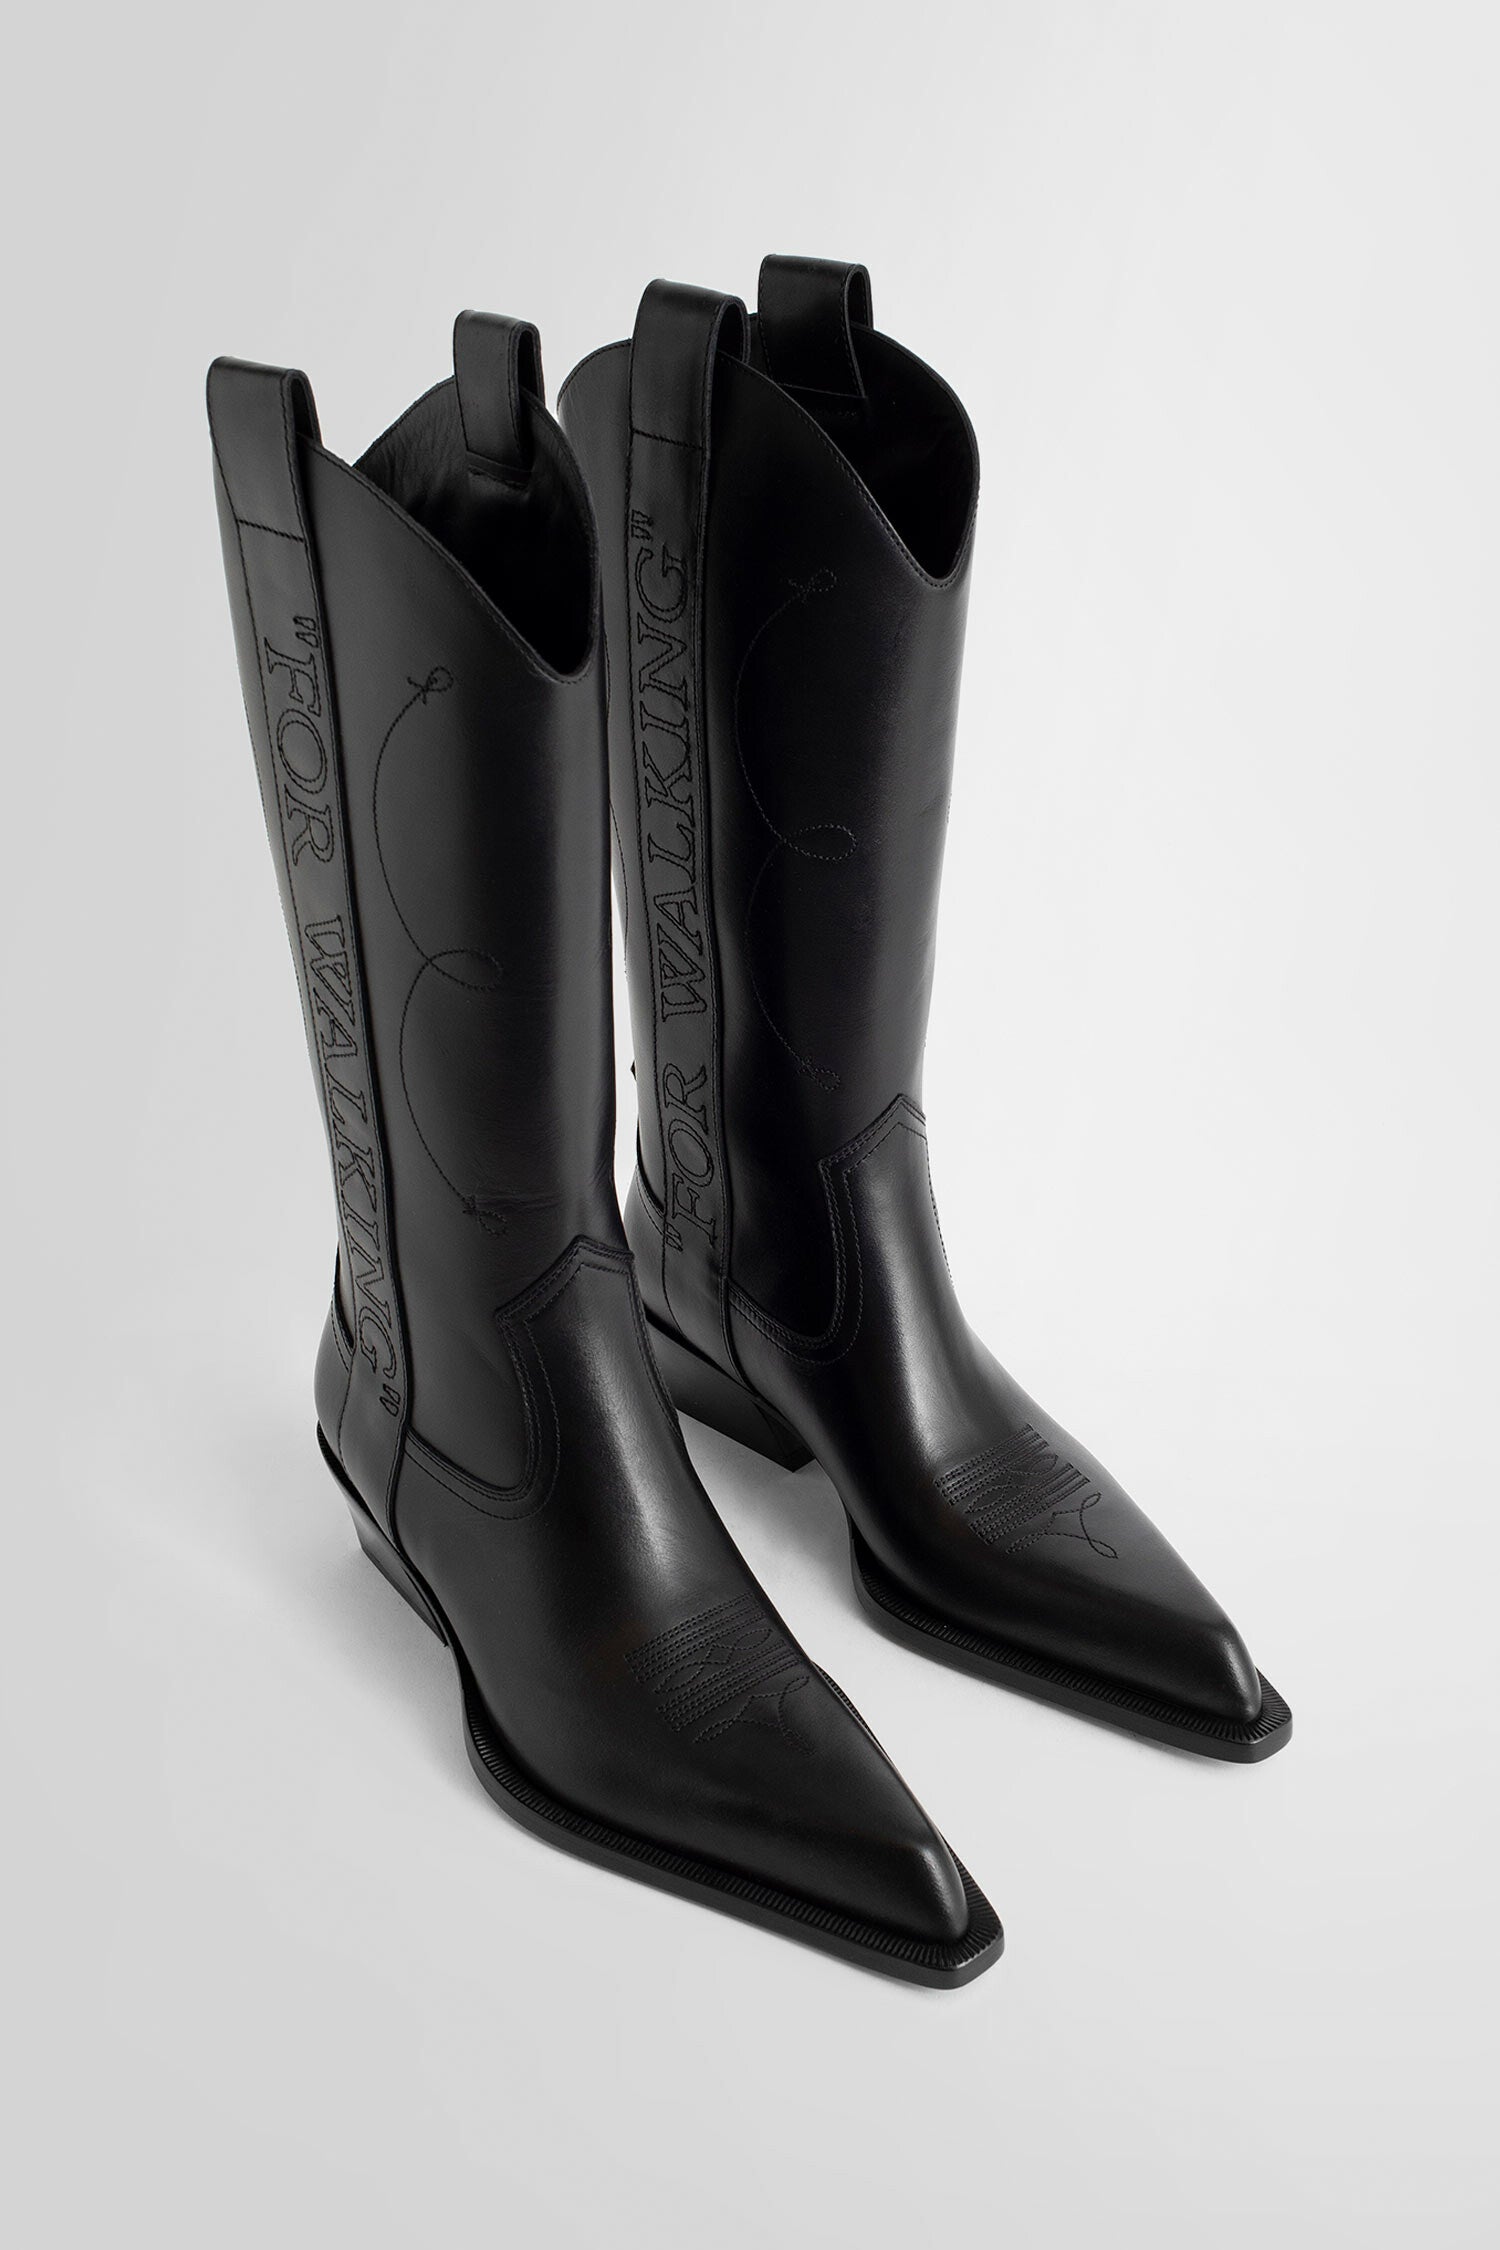 OFF-WHITE WOMAN BLACK BOOTS